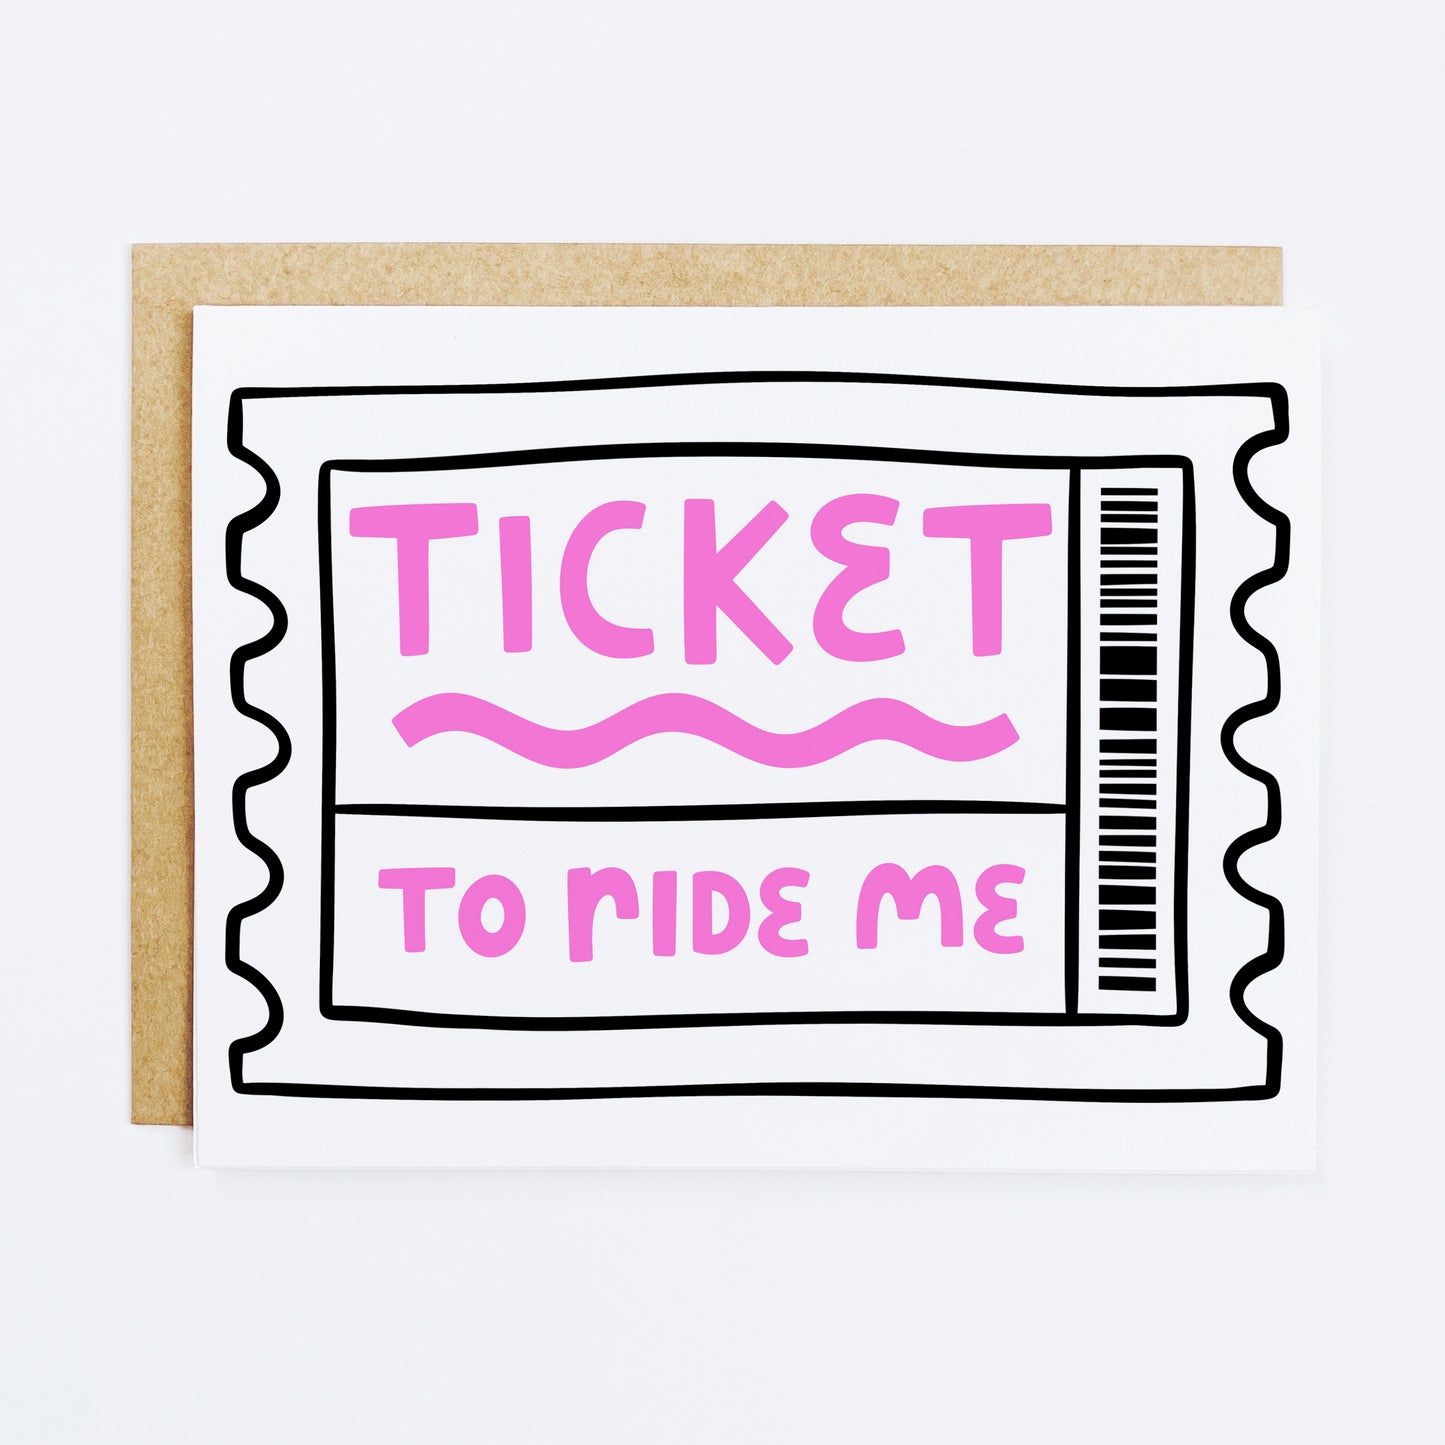 Ticket To Ride Me Card